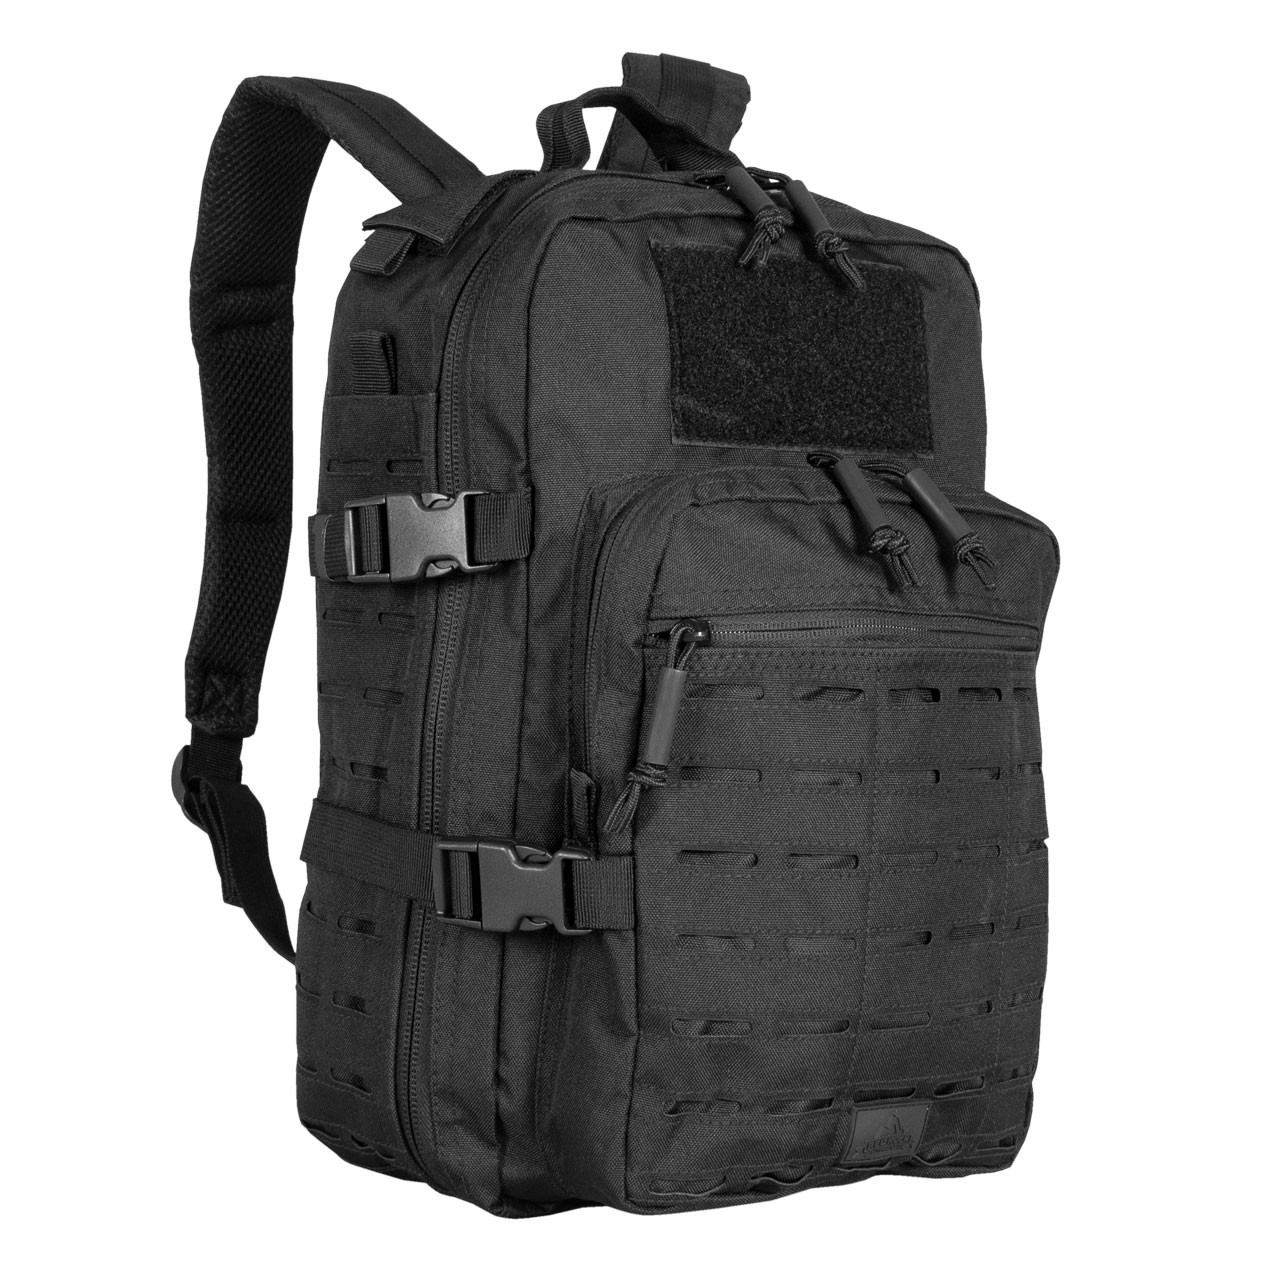 Transporter Day Pack, Red Rock Outdoor Gear